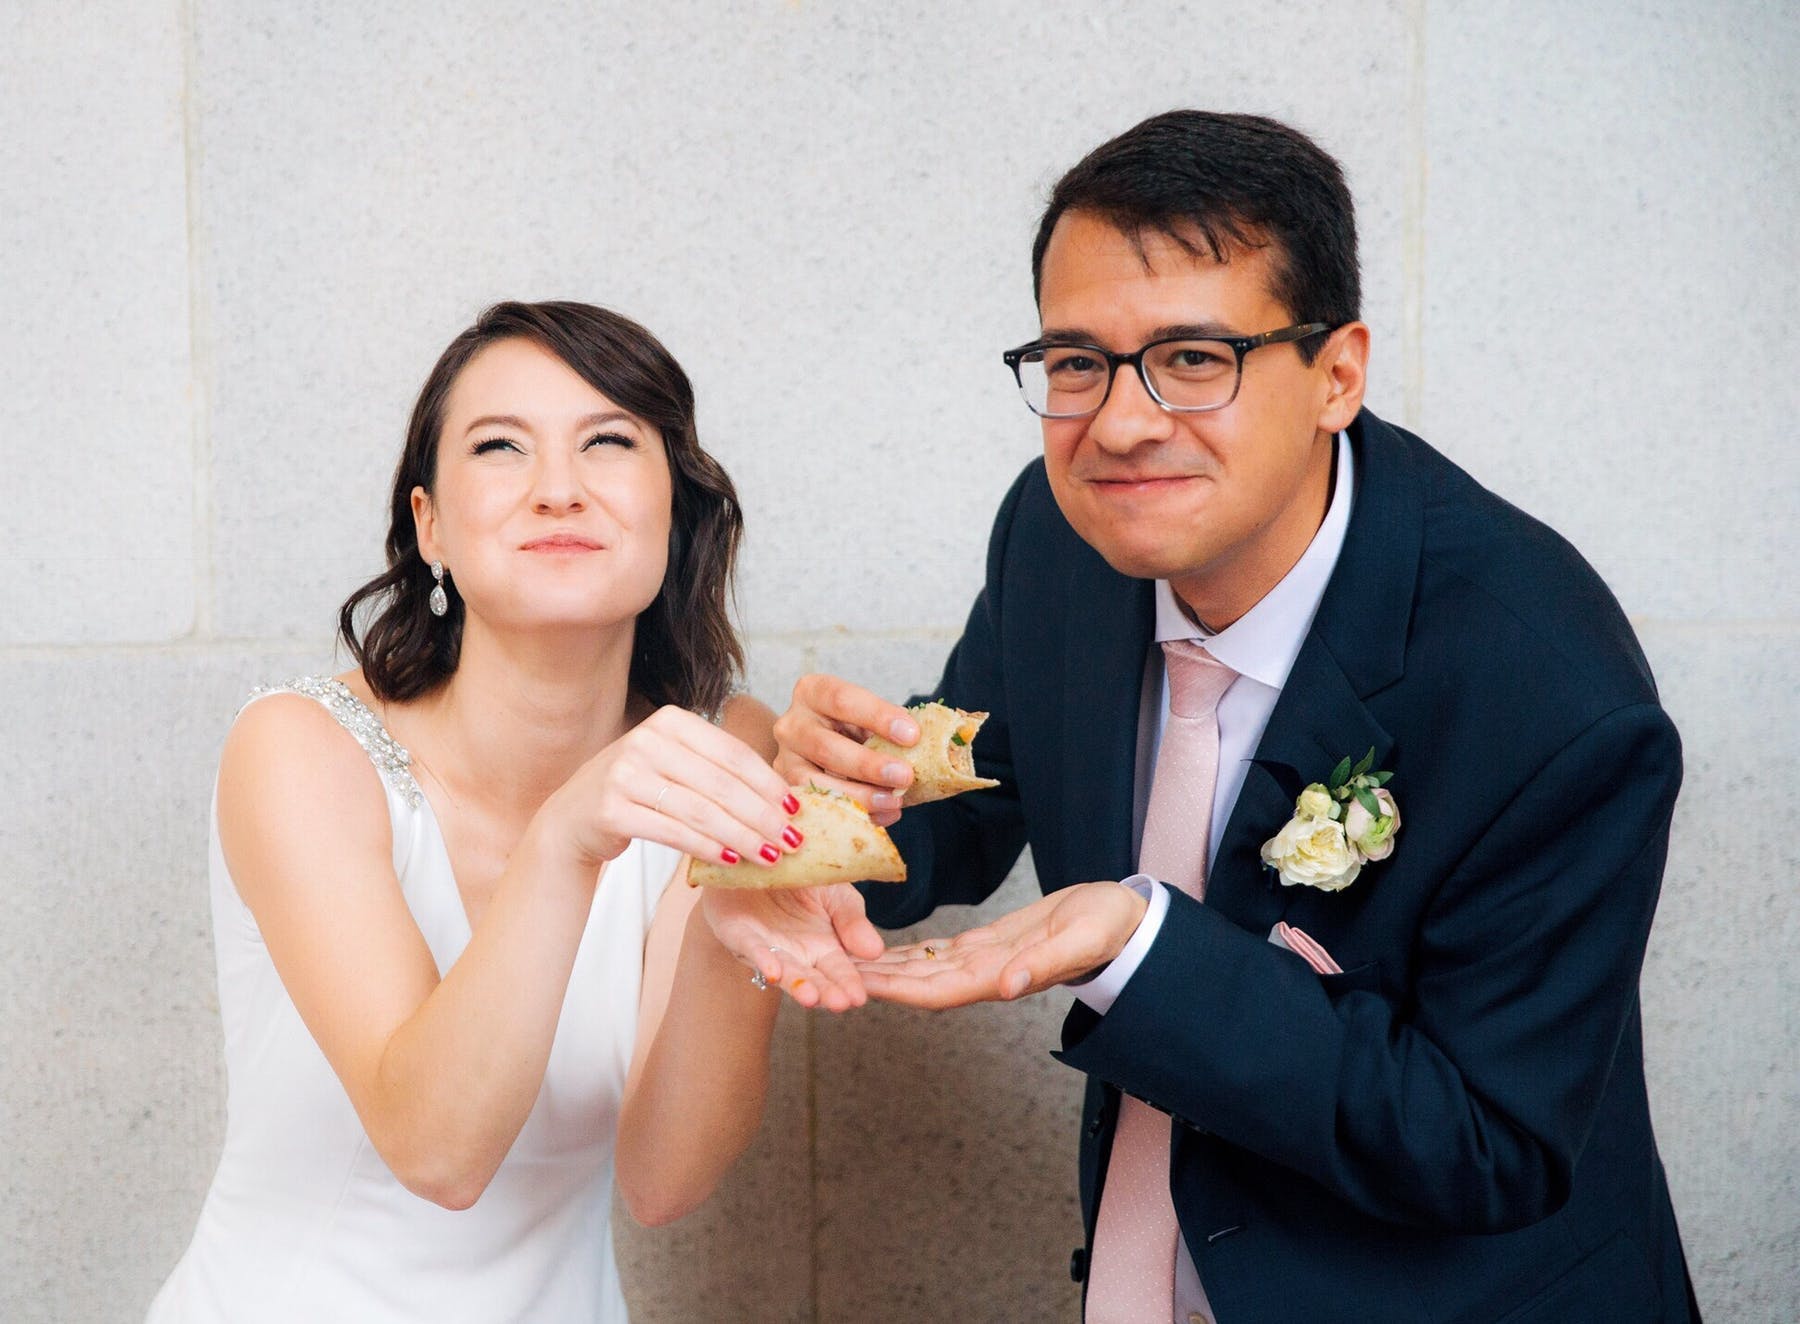 a man and a woman eating a sandwich